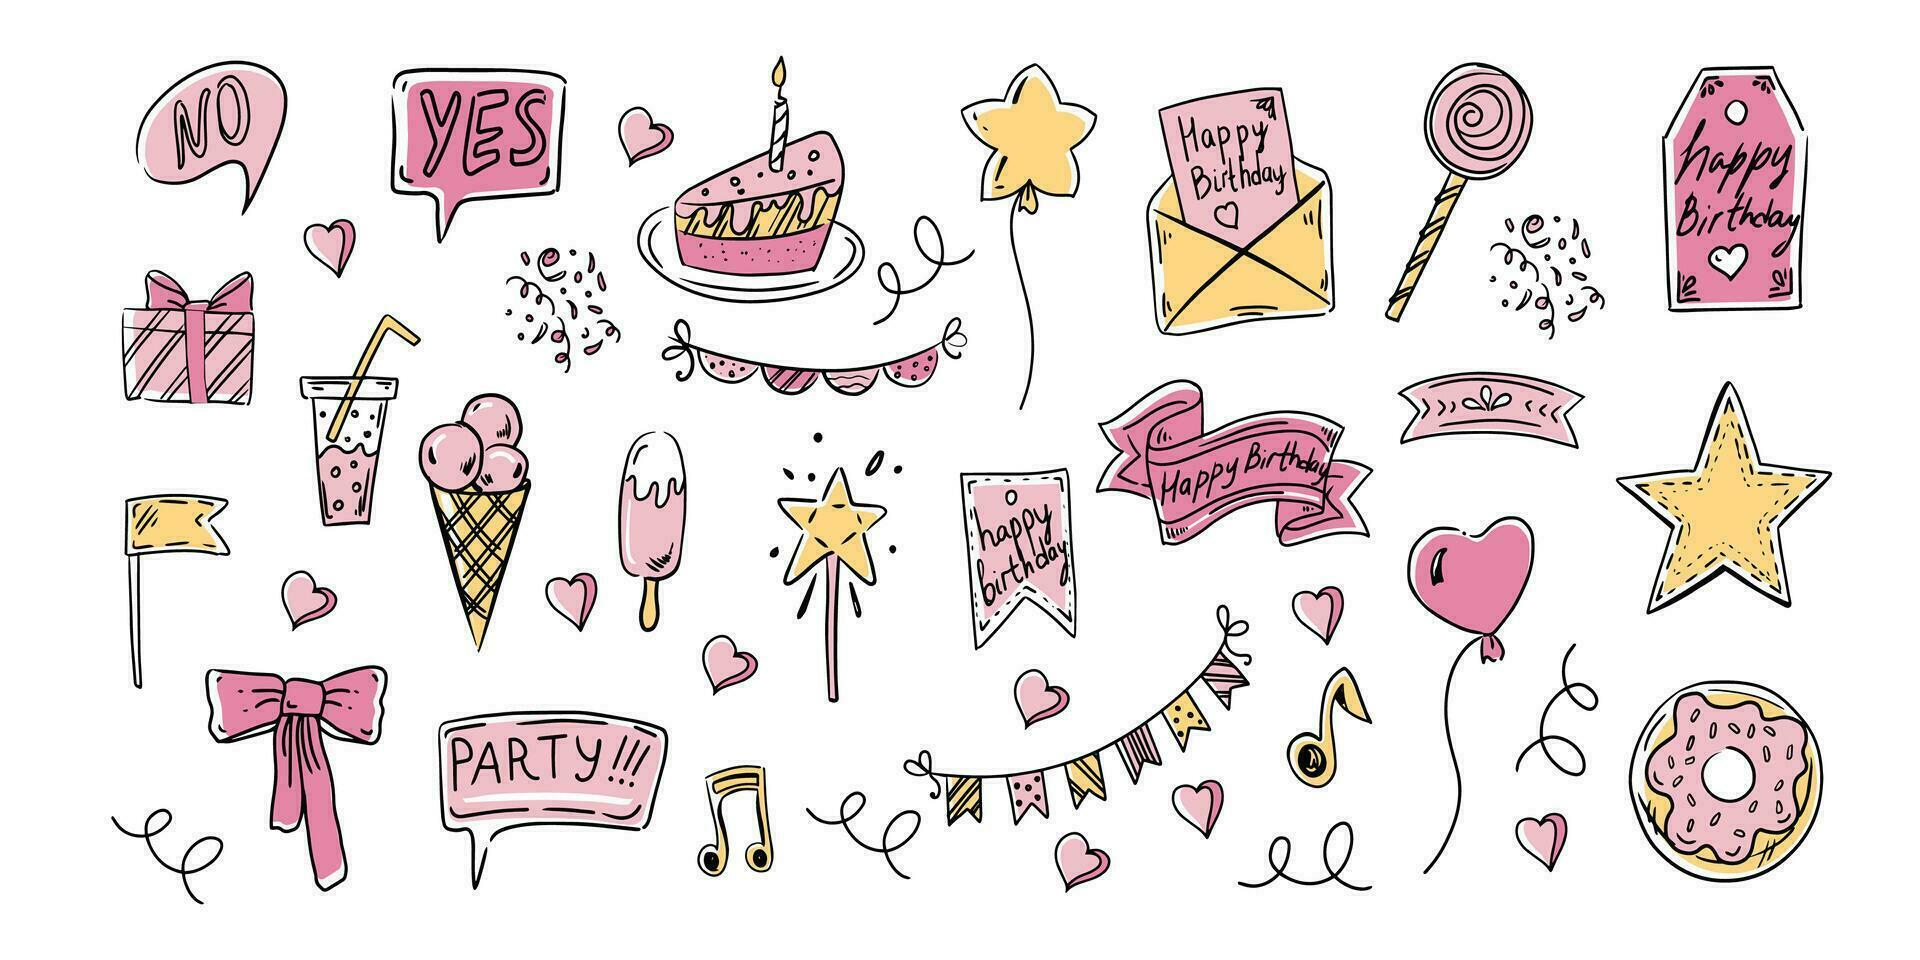 Birthday colored doodle set. Hand drawn vector Happy Birthday sketches on white background. Envelope, cake, balloon, ice cream, flags, hearts, labels, ribbons, bow, gift, star.